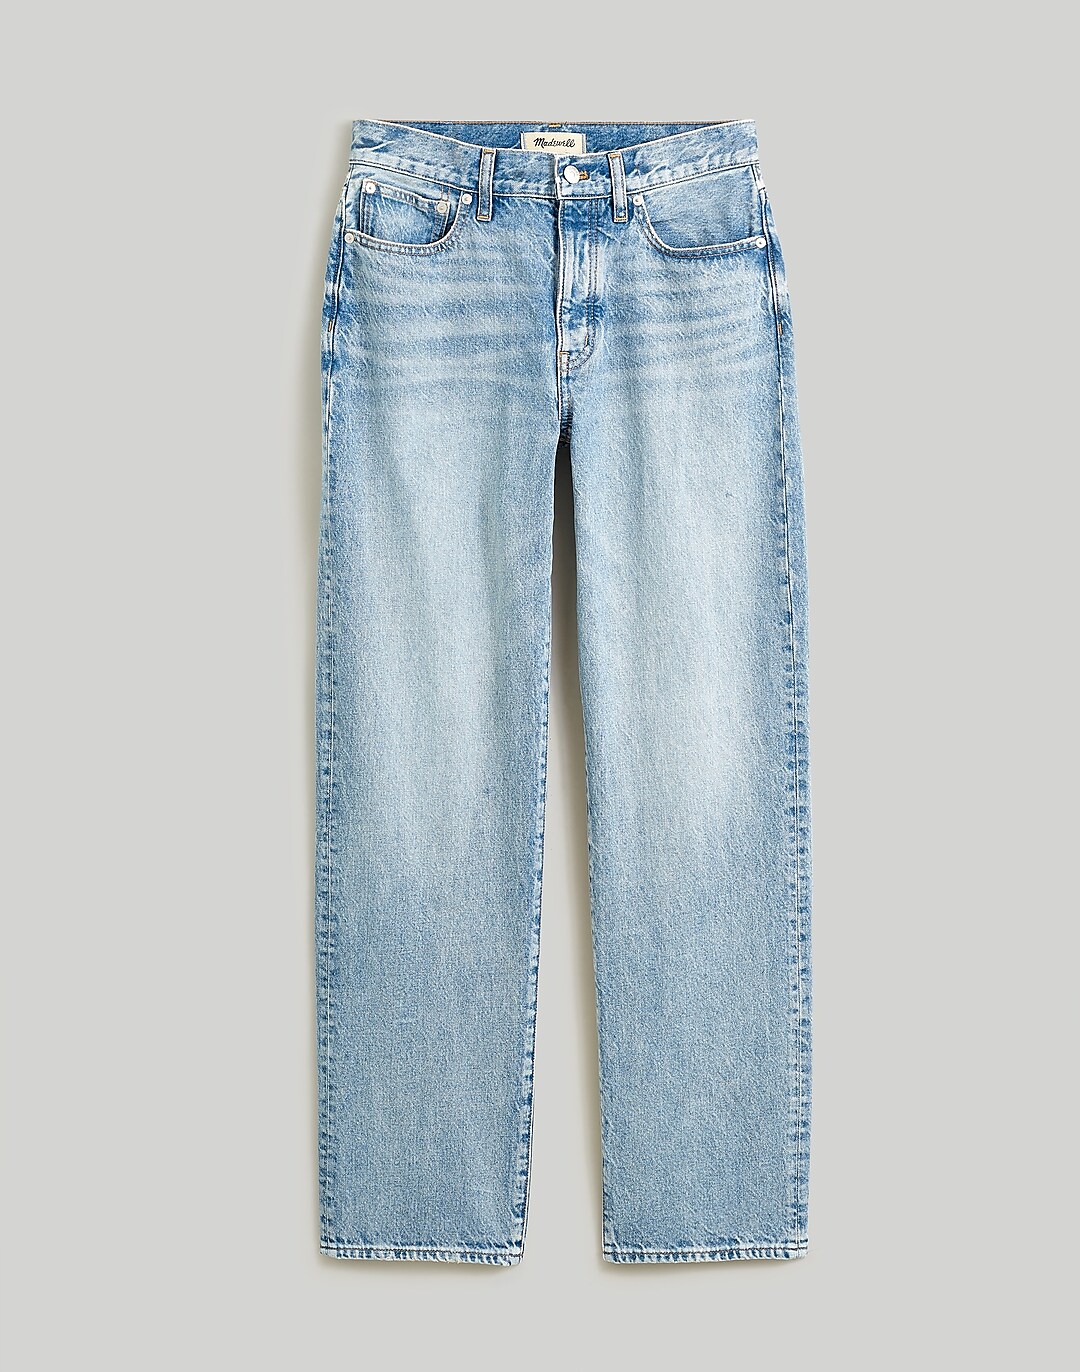 Madewell Jeans Style J9527 Tag Size W34 L32(31) see measuremnt Slim  Straight NWT